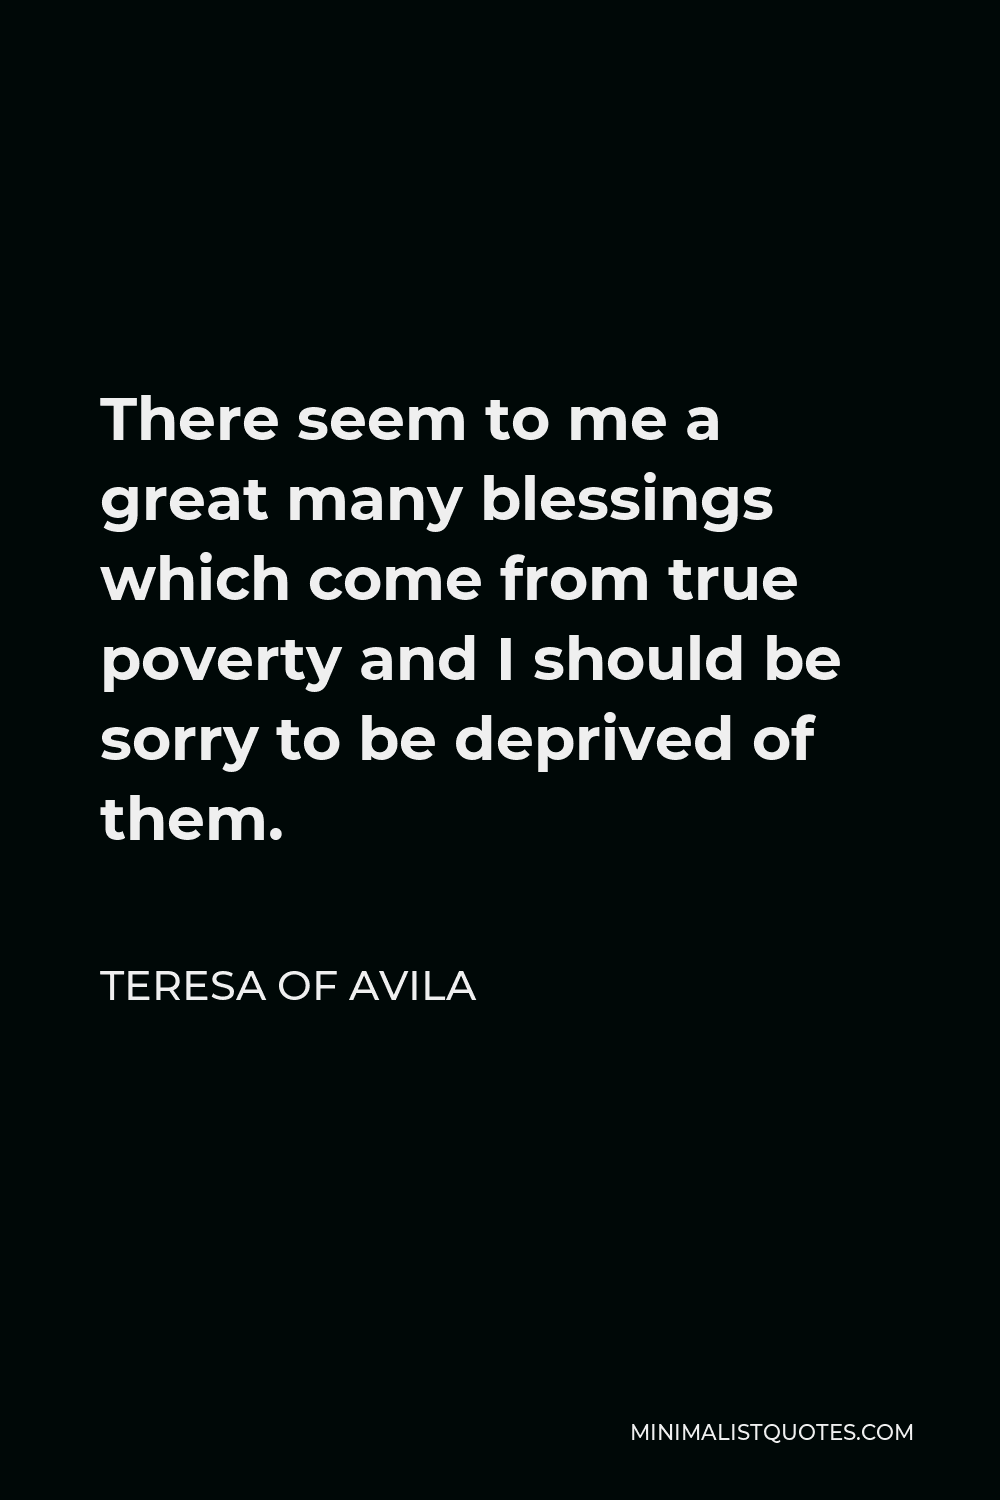 Teresa of Avila Quote - There seem to me a great many blessings which come from true poverty and I should be sorry to be deprived of them.